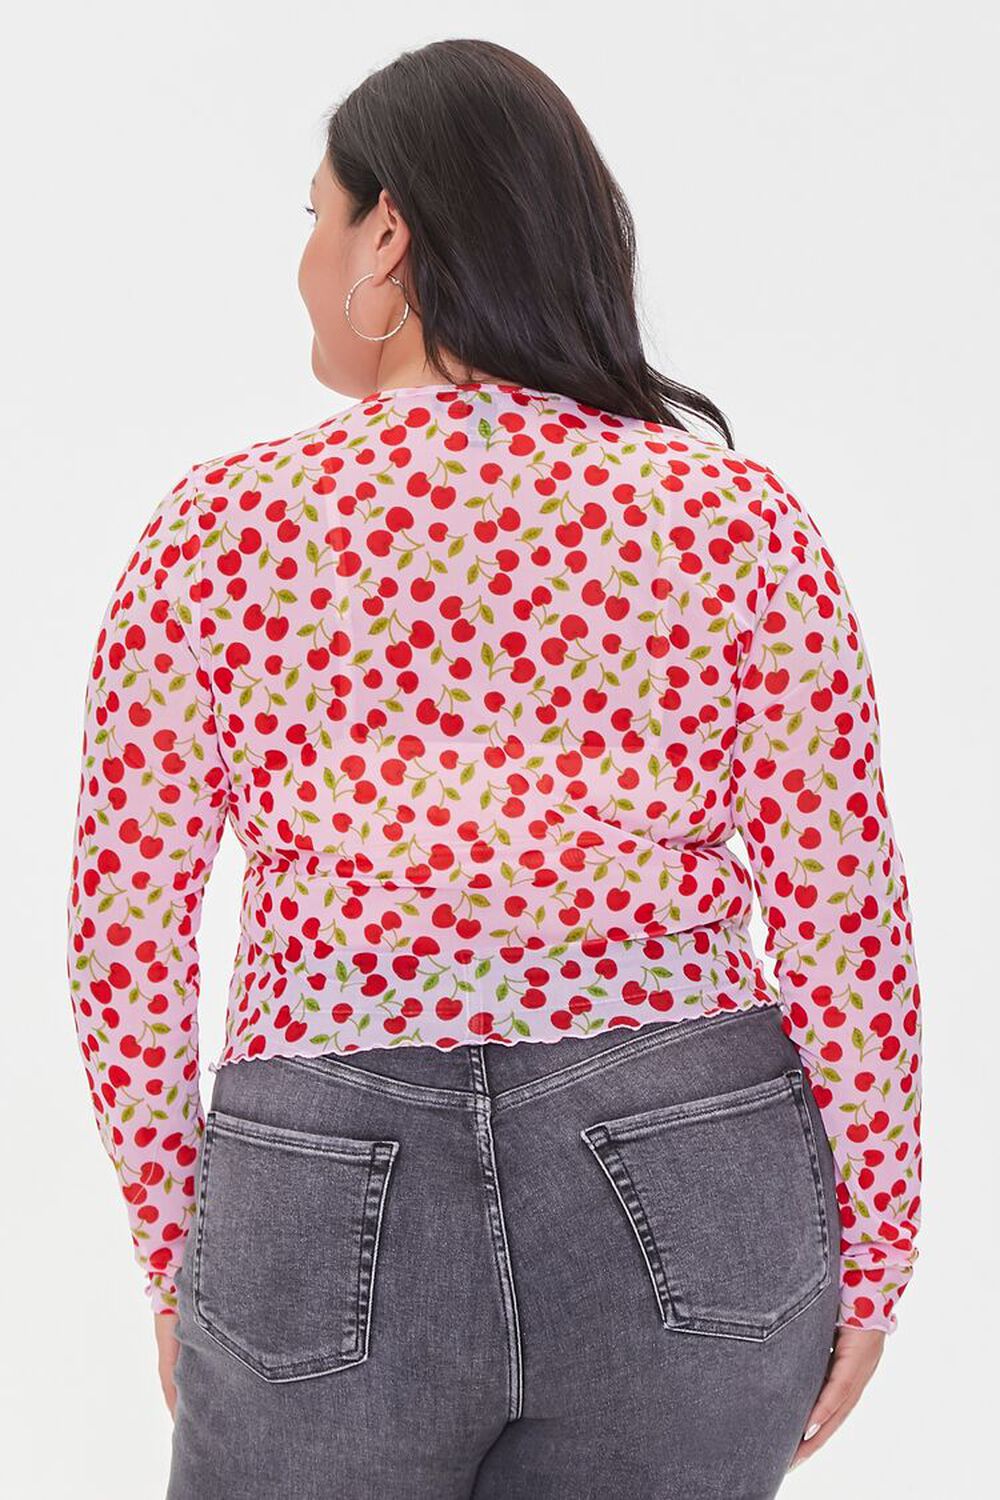 PINK/RED Plus Size Cherry Print Top, image 3